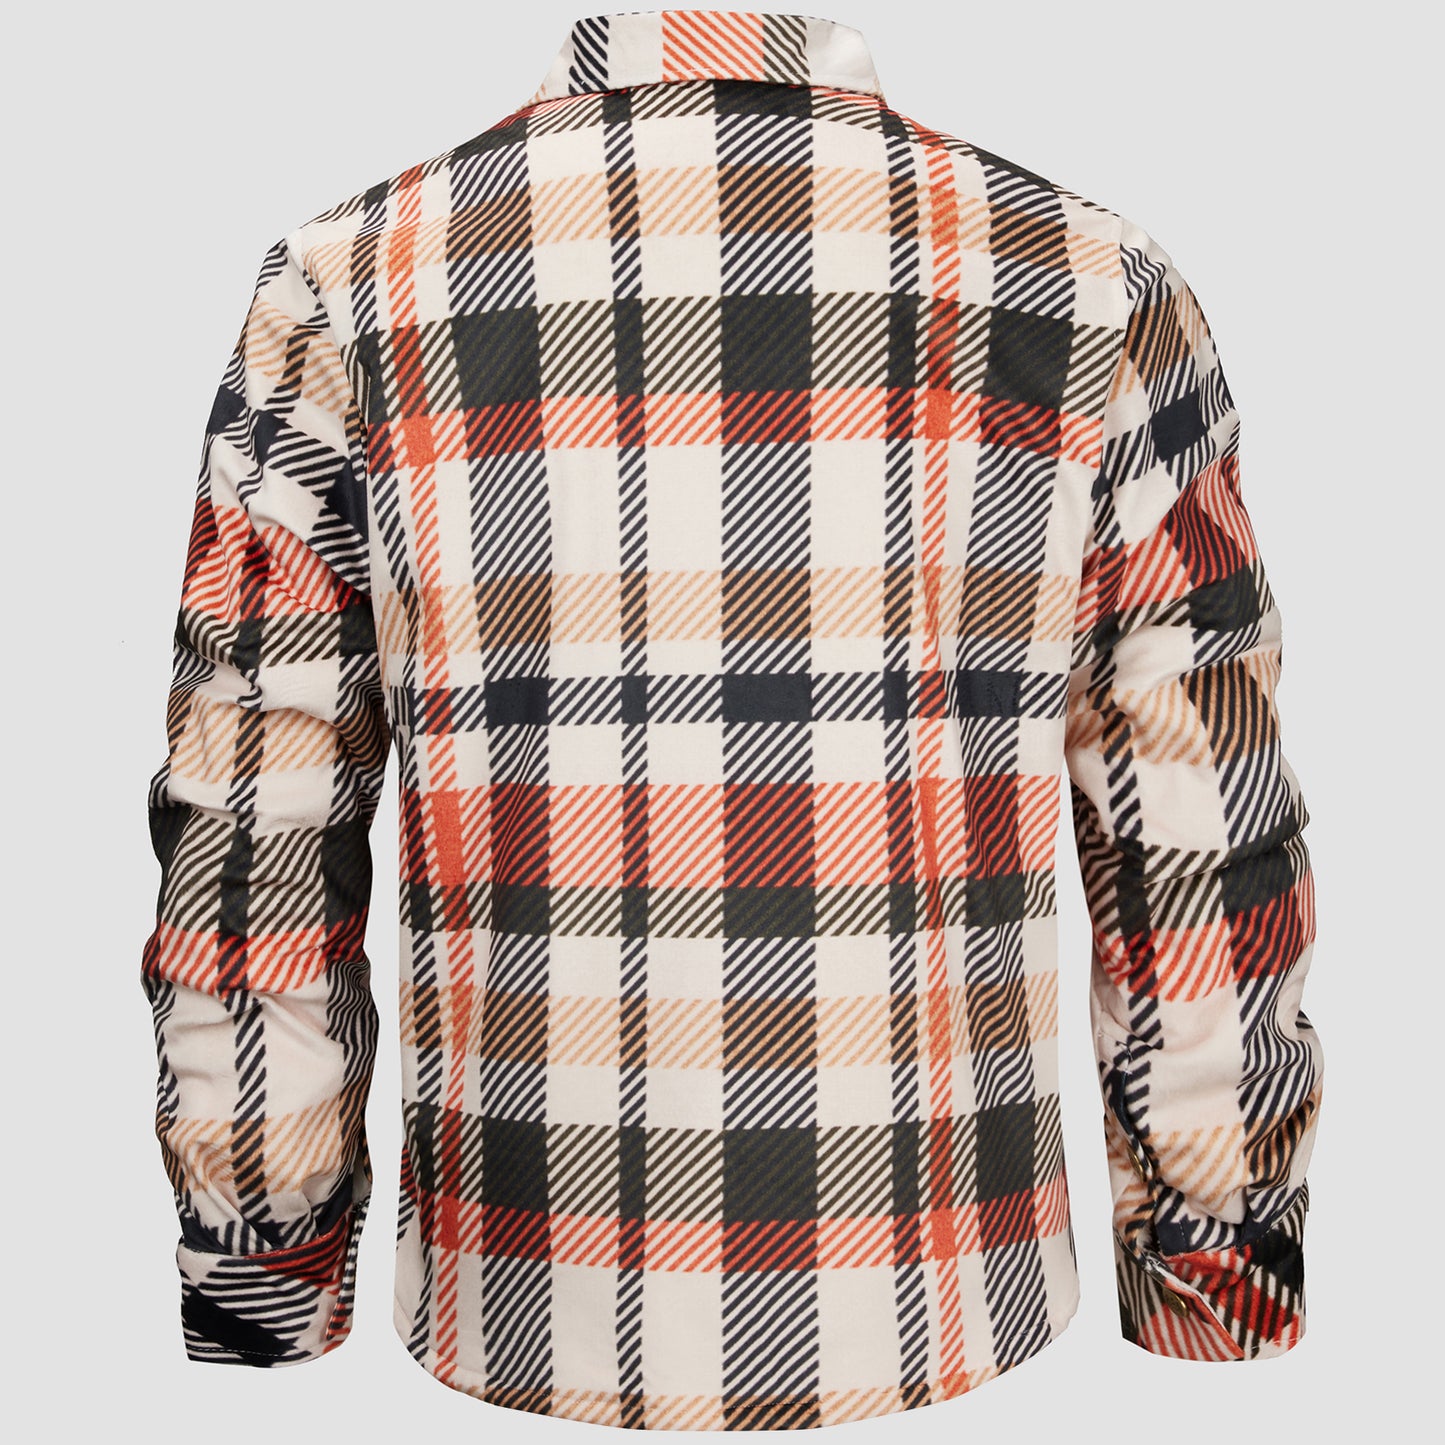 Flannel Sherpa Lined Plaid Lumber Jacket